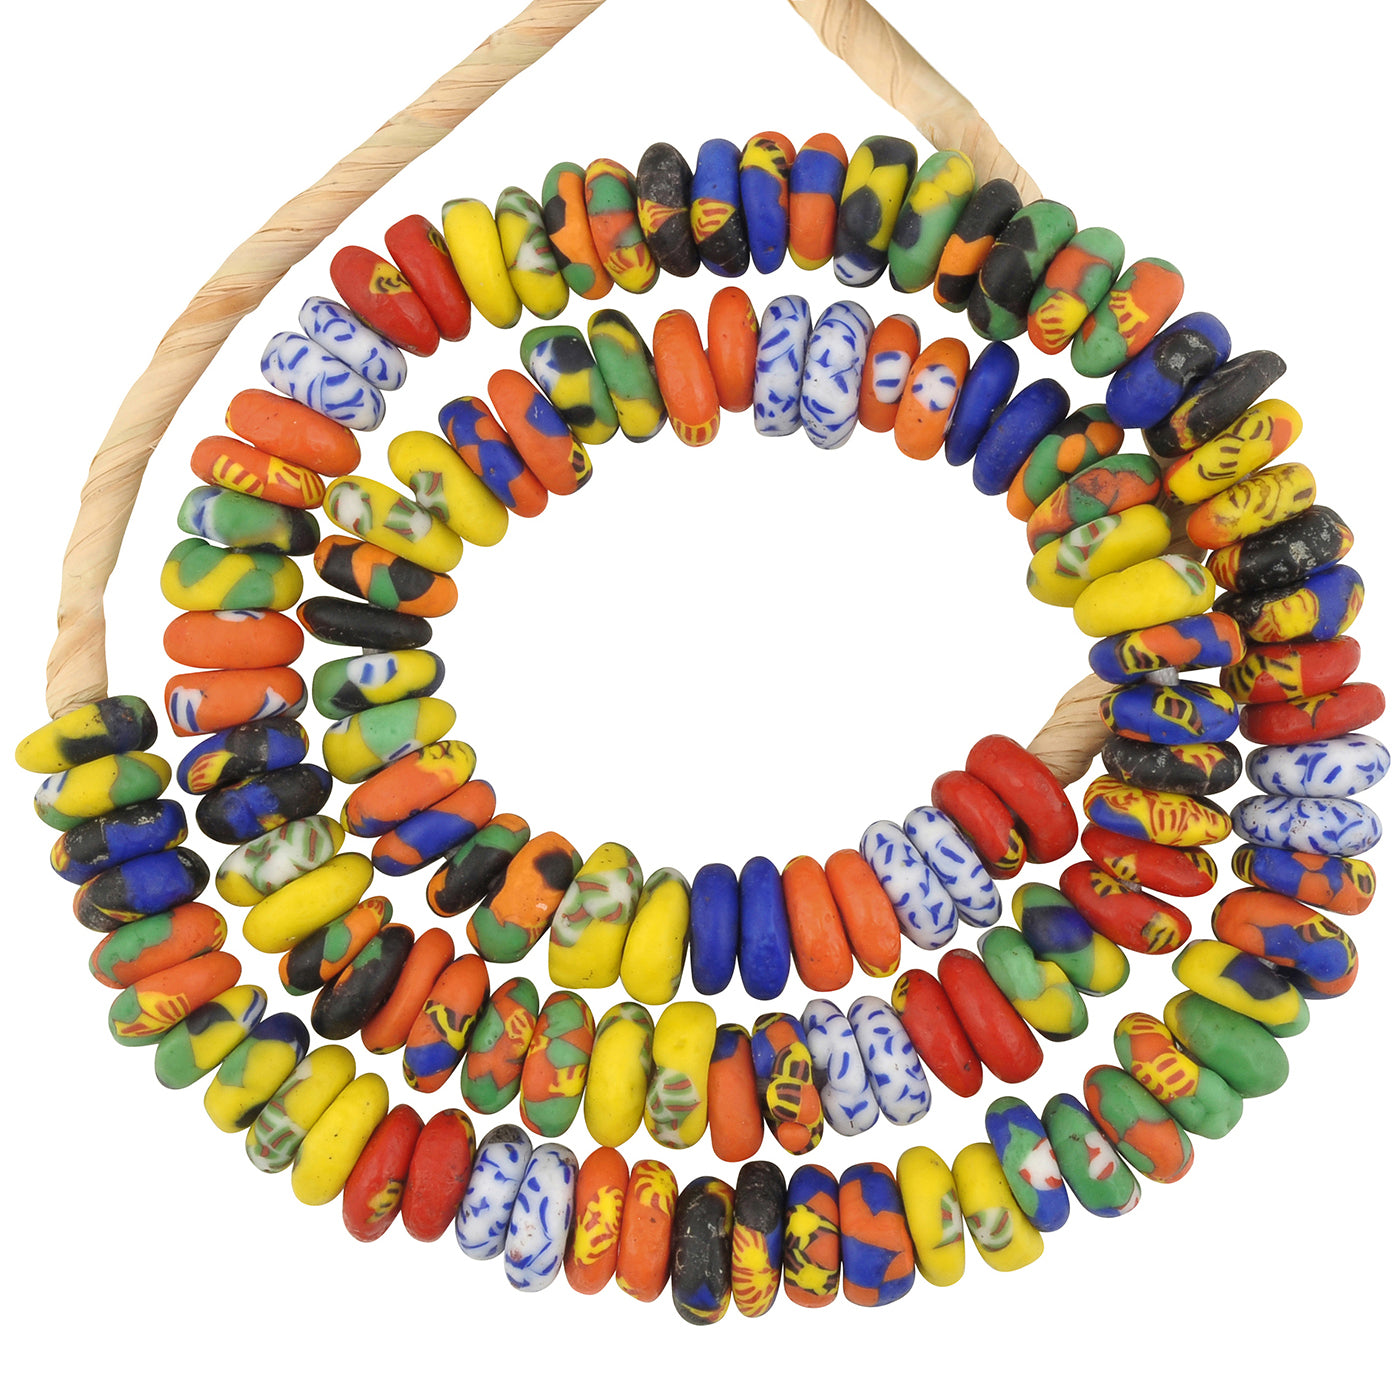 Colorful African Trade Beads - Fused Recycled Glass from Ghana